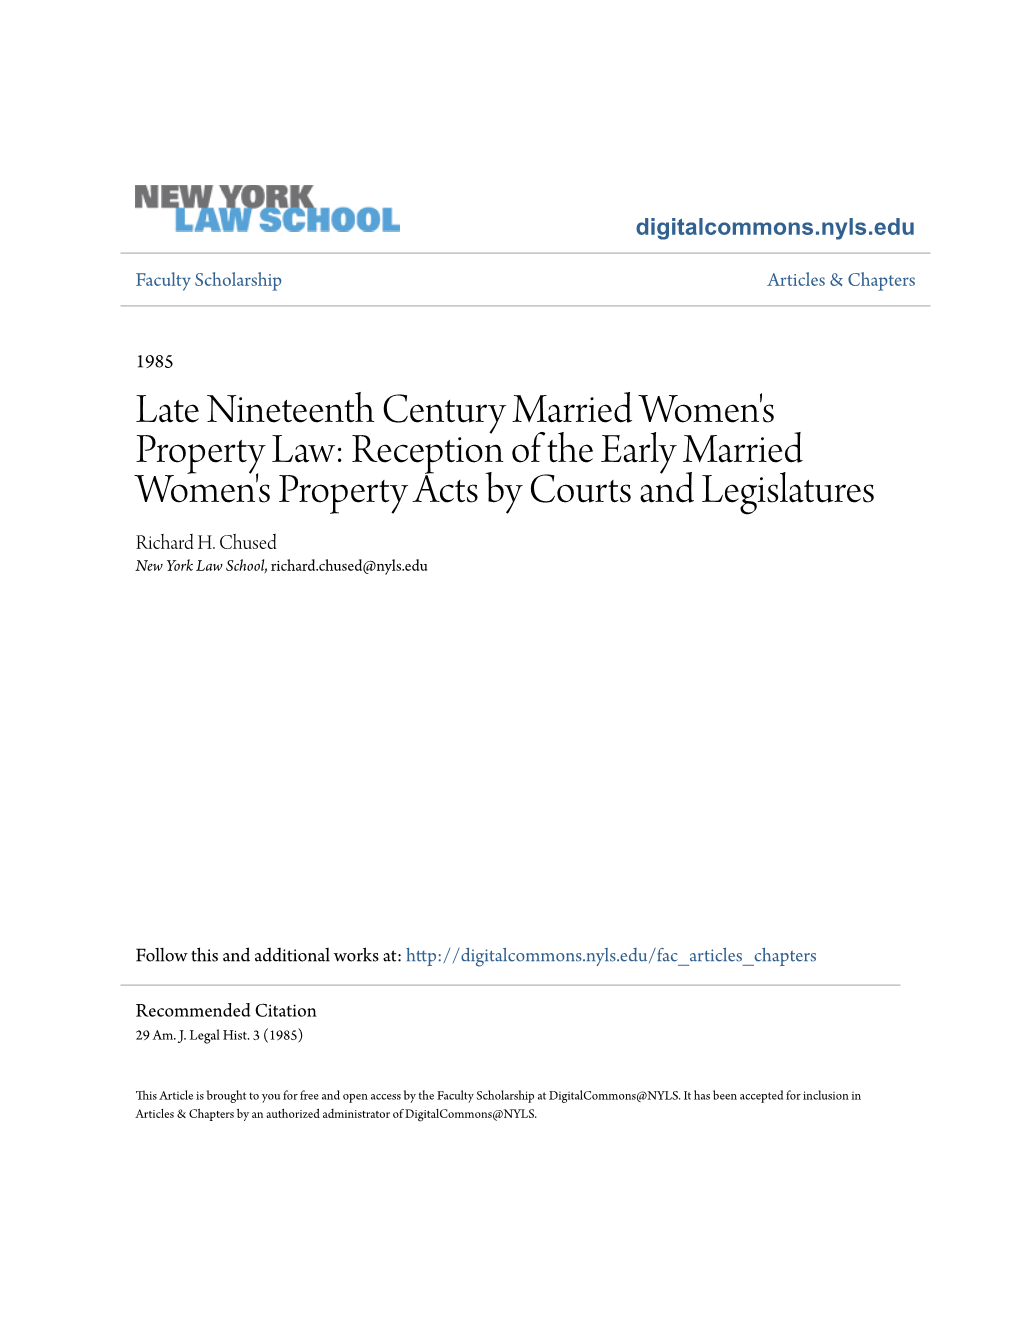 Reception of the Early Married Women's Property Acts by Courts and Legislatures Richard H